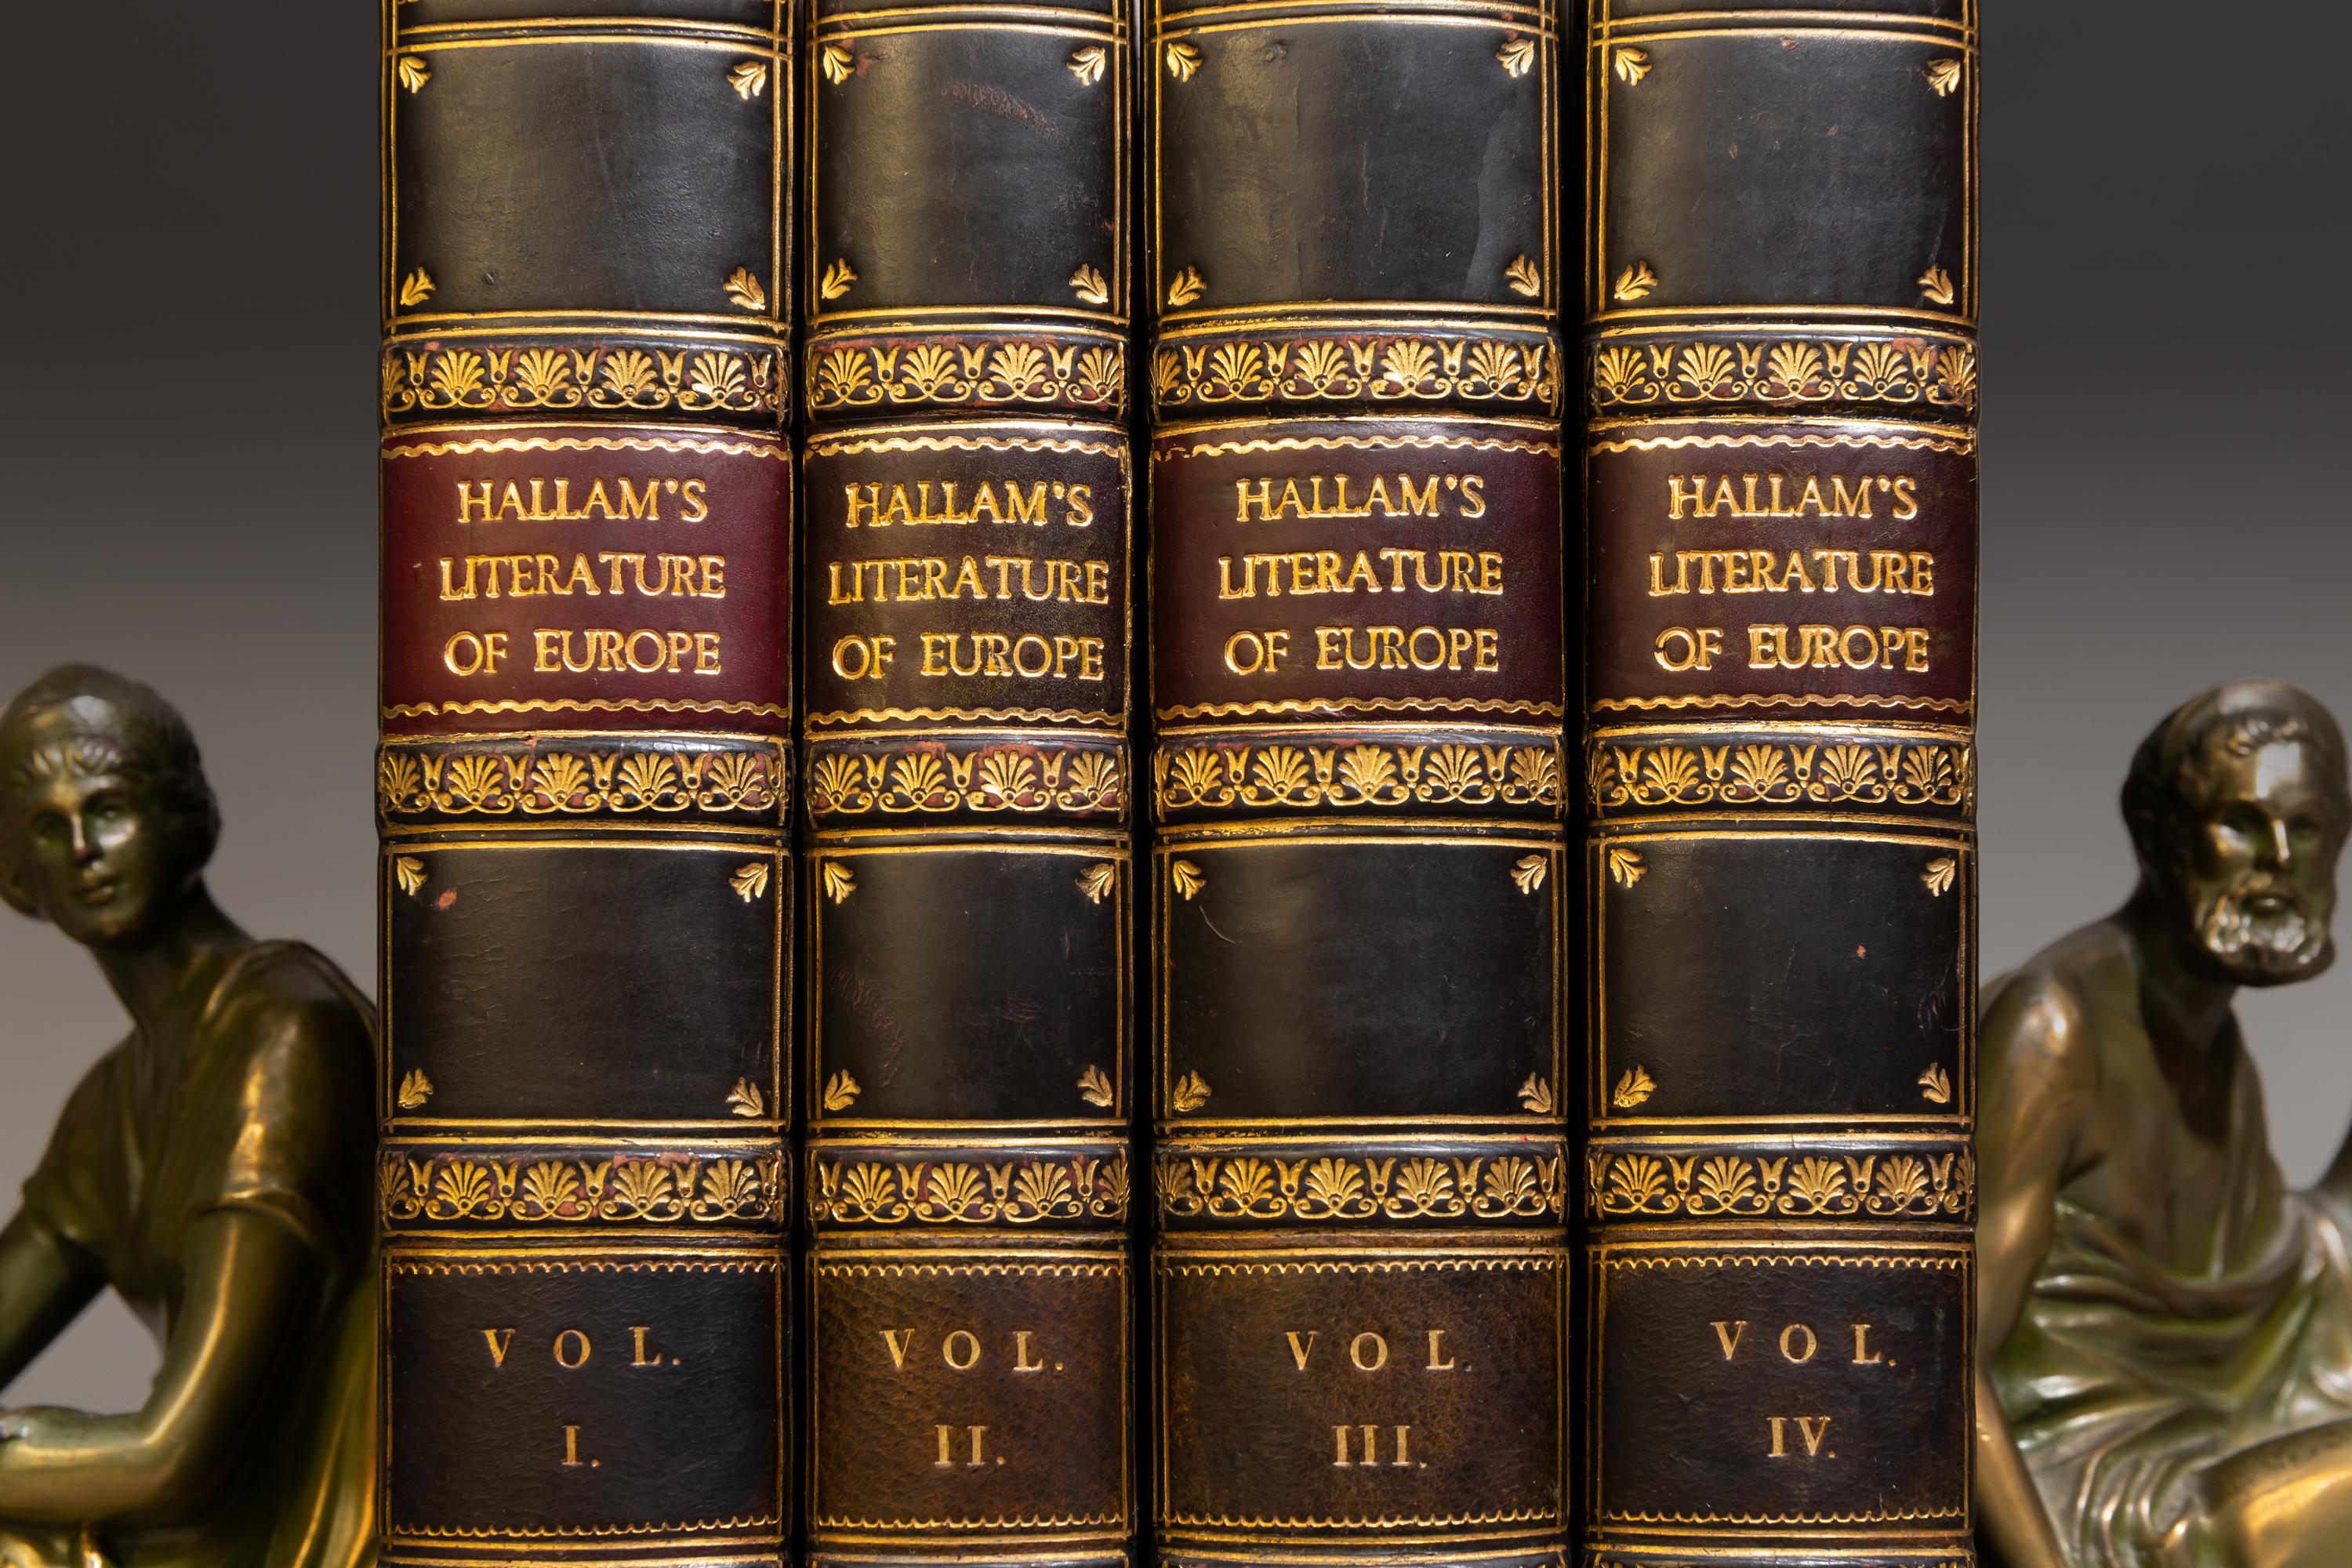 4 Volumes. Henry Hallam. Introduction to the Literature of Europe. In the 15th, 16th & 17th Centuries. Bound in full navy calf. Raised bands, gilt on spines and covers, purple label.
Published: London: John Murray, 1837.